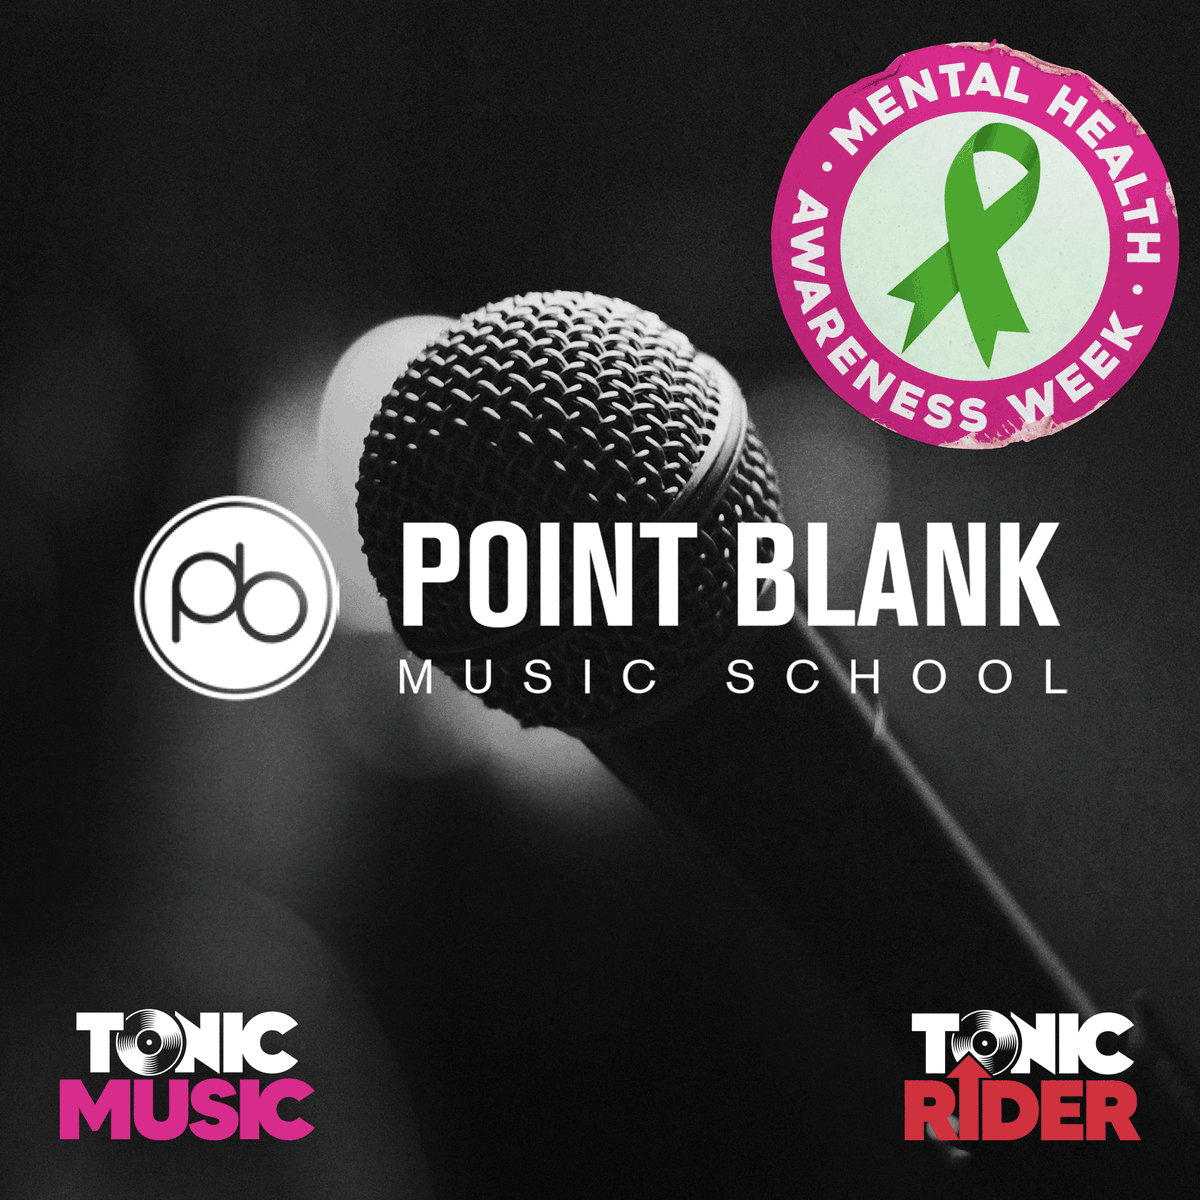 As part of #MentalHealthAwarenessWeek, Tonic Music provided a 'Intro to Mental Health in the Music Industry' workshop for students at @Point_Blank 

Read all about here > tonicmusic.co.uk/post/pbms24

#TonicRider #PointBlank #MentalHealth #Wellbeing #Music